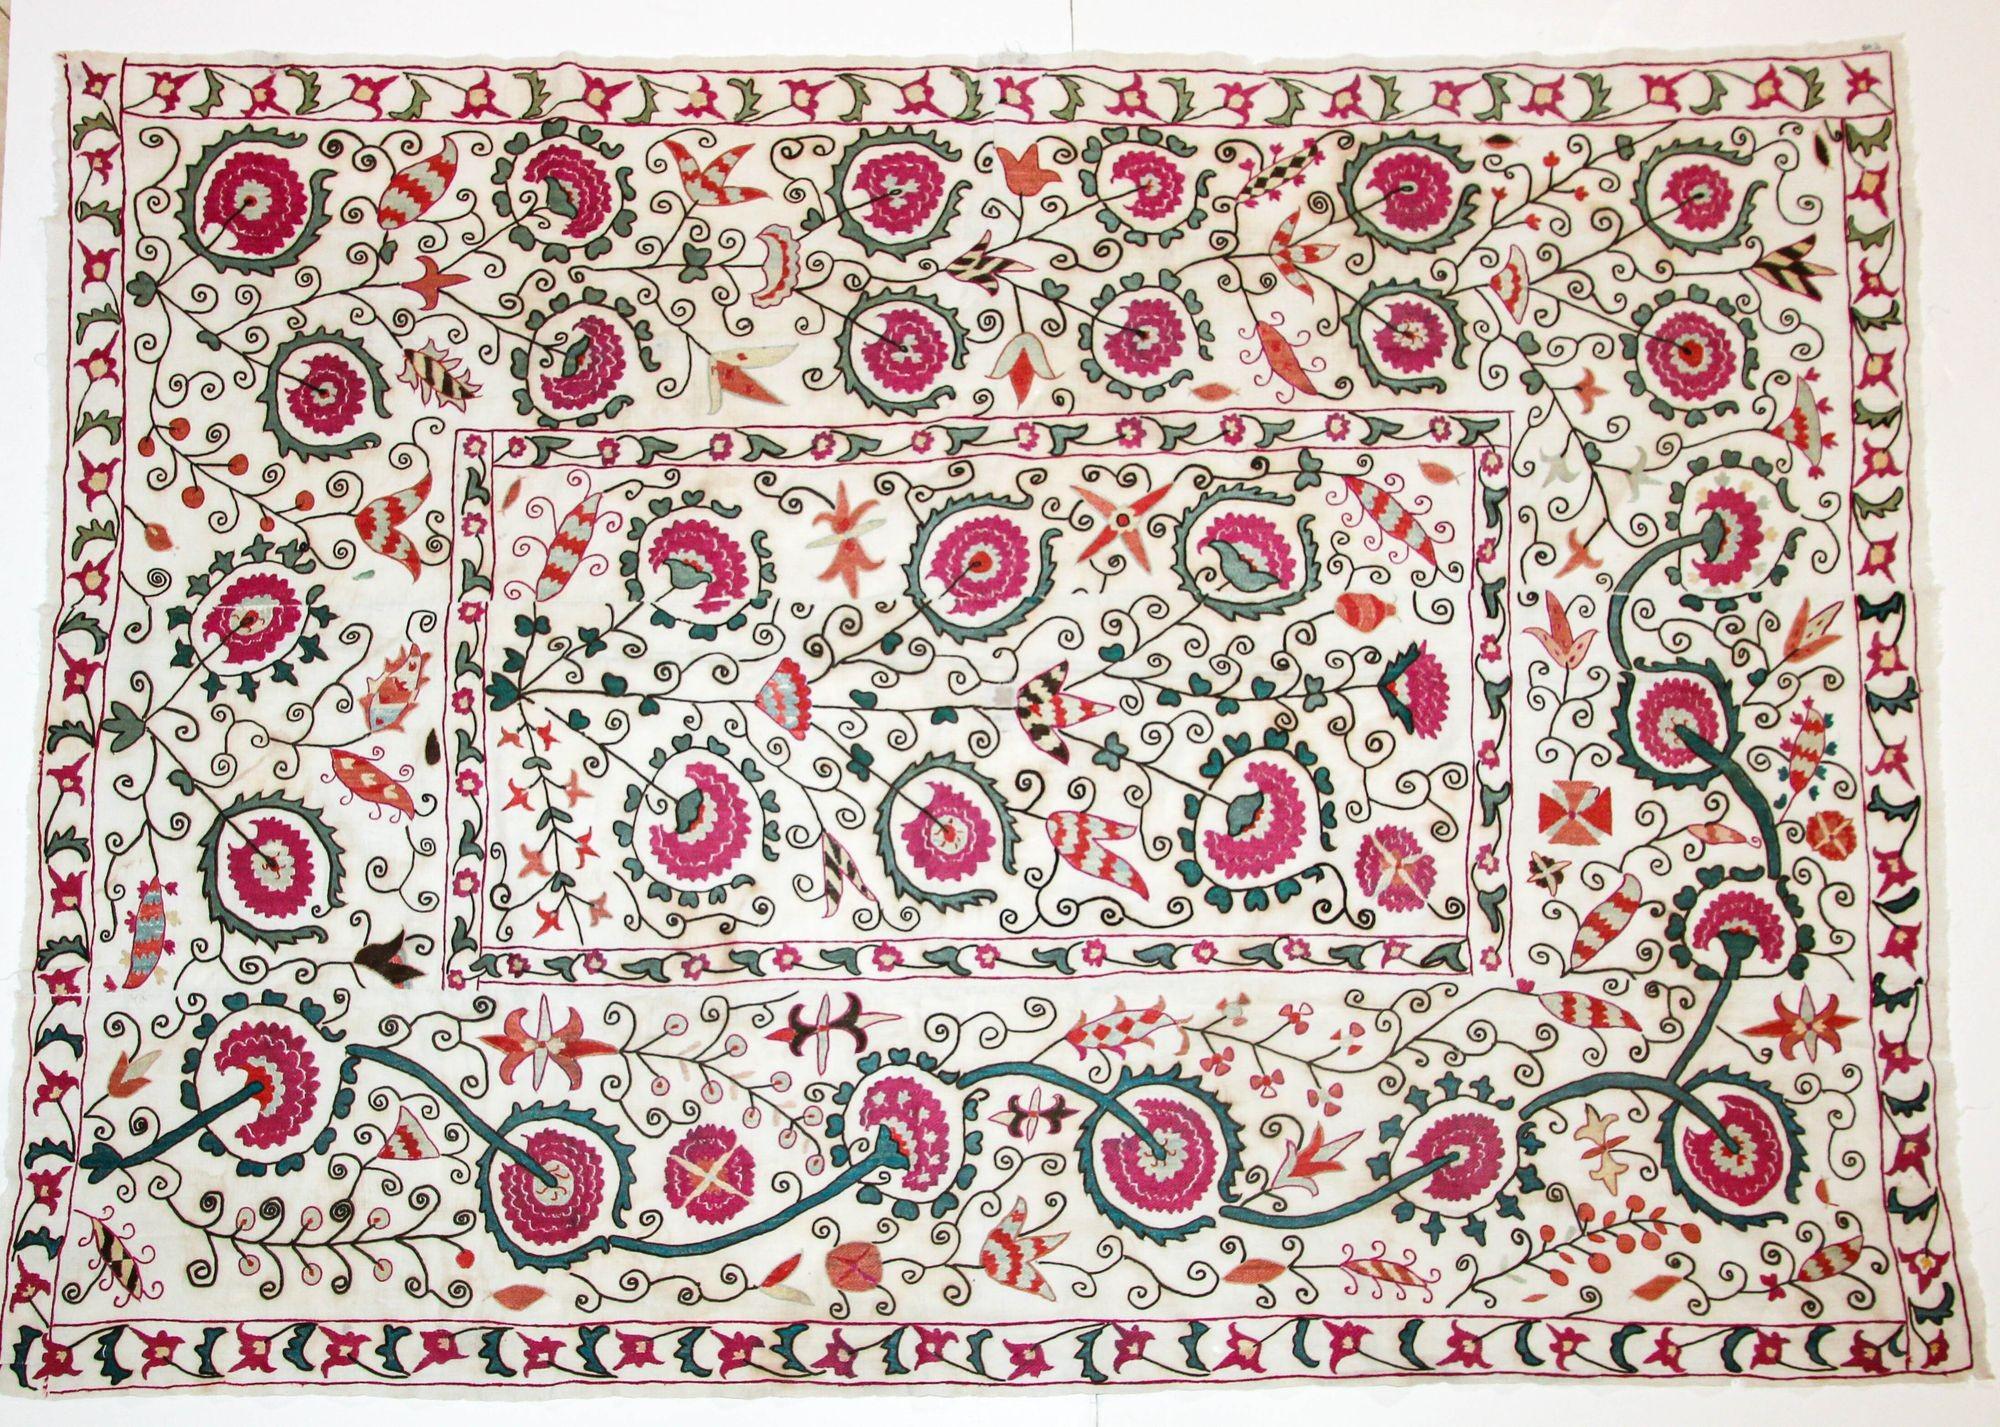 Fabulous antique 19th C. Suzani from Bukhara Uzbekistan embroidered with swaying floral branches and flowers.
Museum quality collectible antique hand embroidered Islamic Art textile called Susani or Suzani.
Very fine art work embroidered with silk